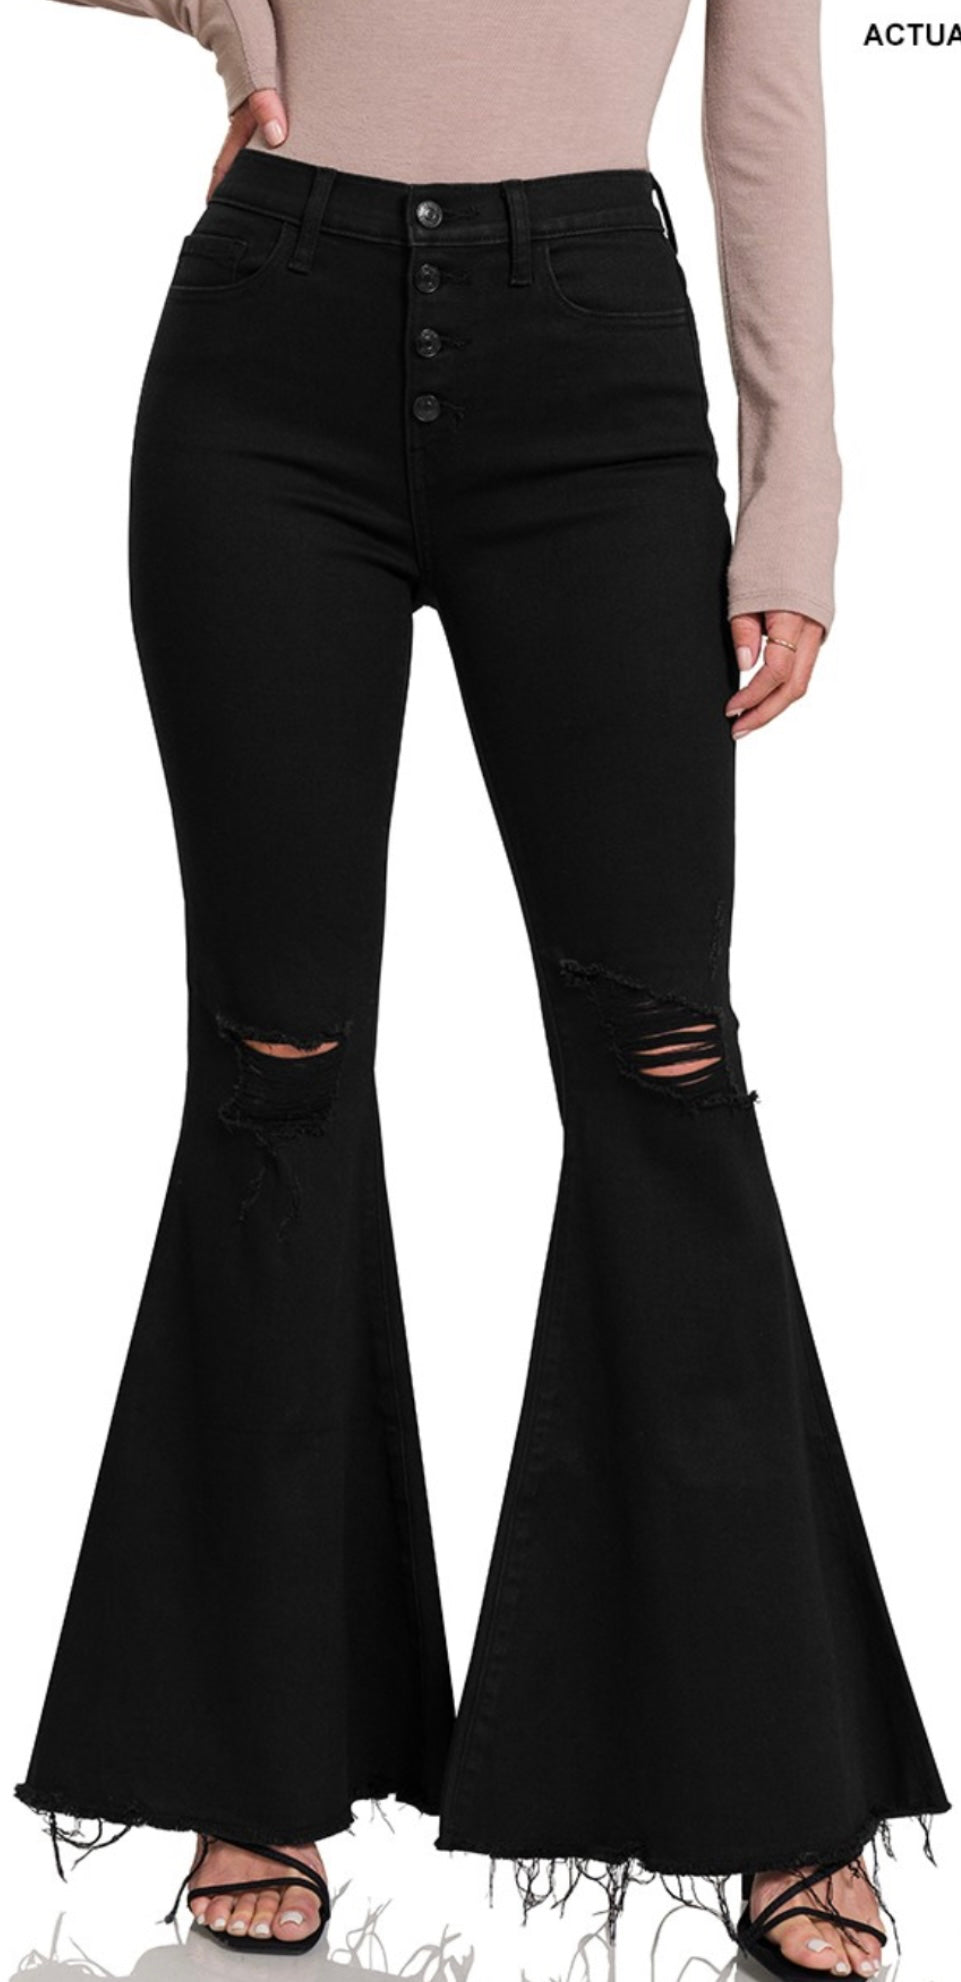 MOLLY DISTRESSED HIGH RISE BELL BOTTOM BLACK JEANS – The Cactus Bar Boutique